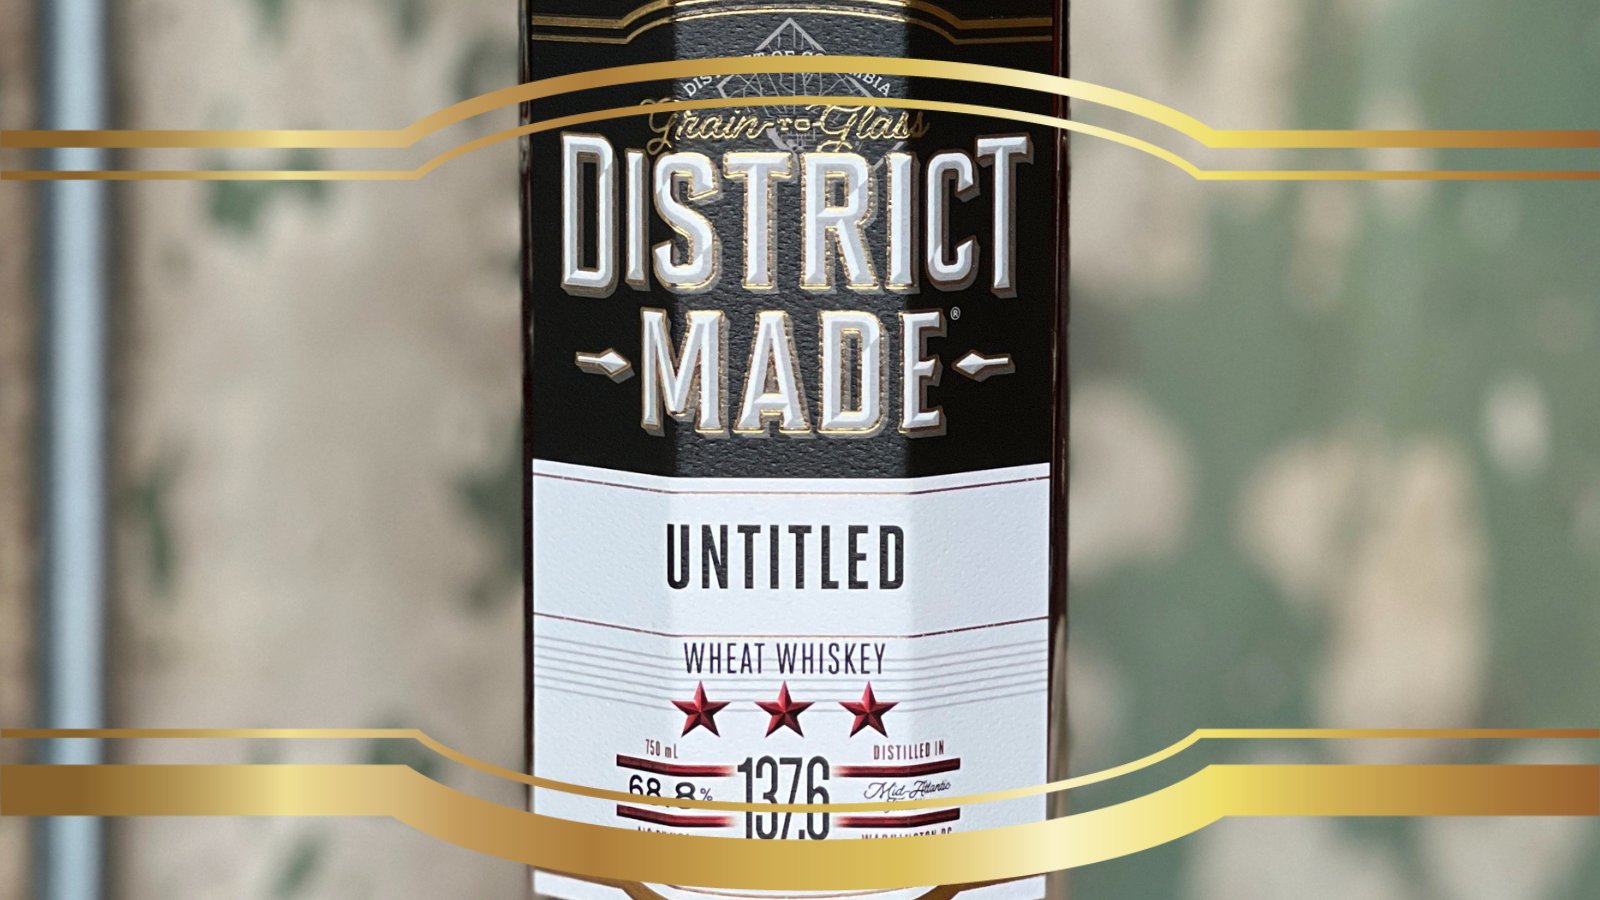 One Eight Distilling District Made Untitled Whiskey